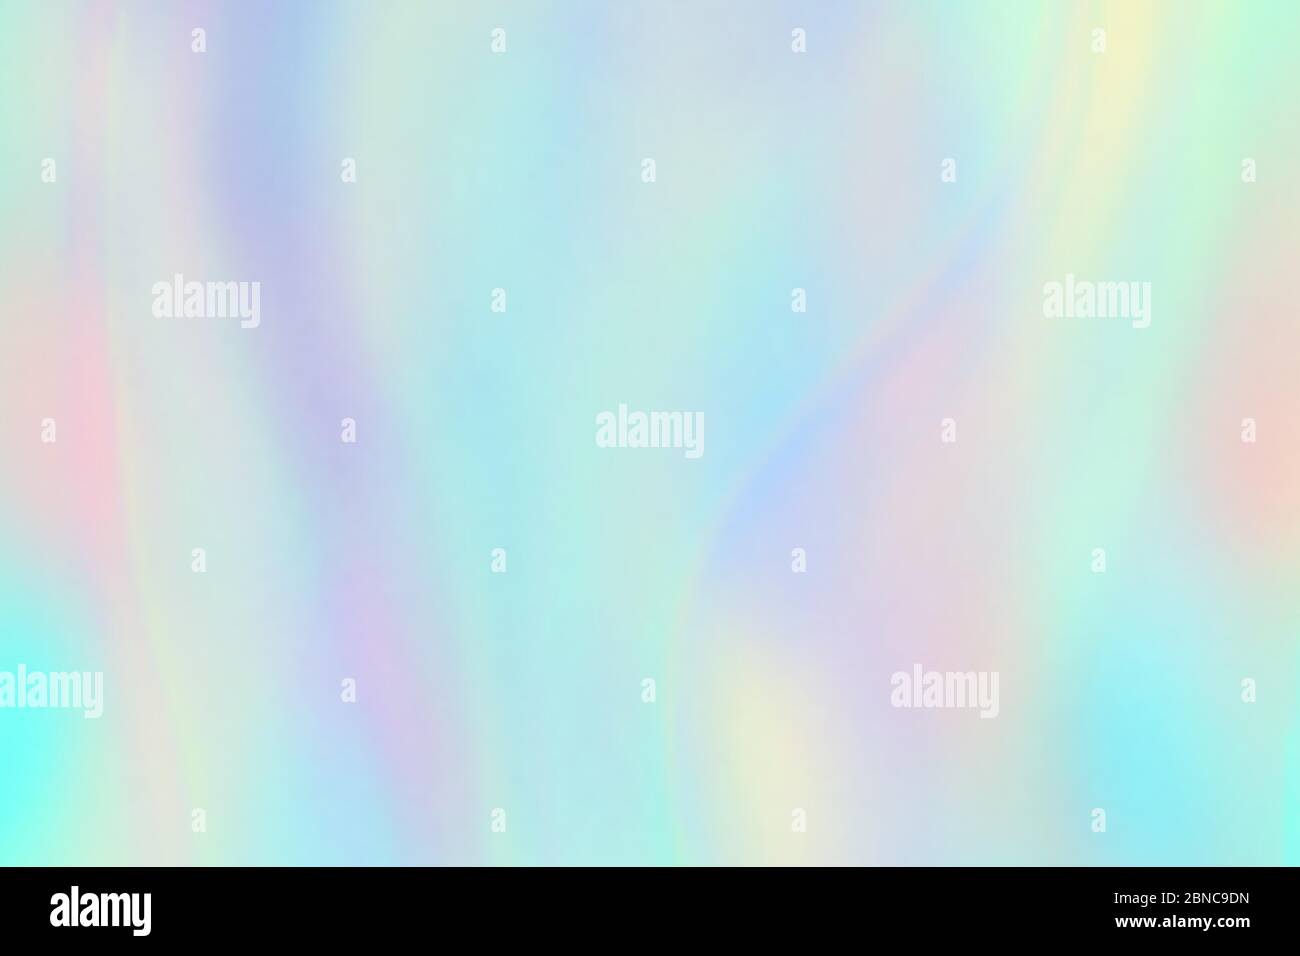 Holographic iridescent reflective rainbow background for social